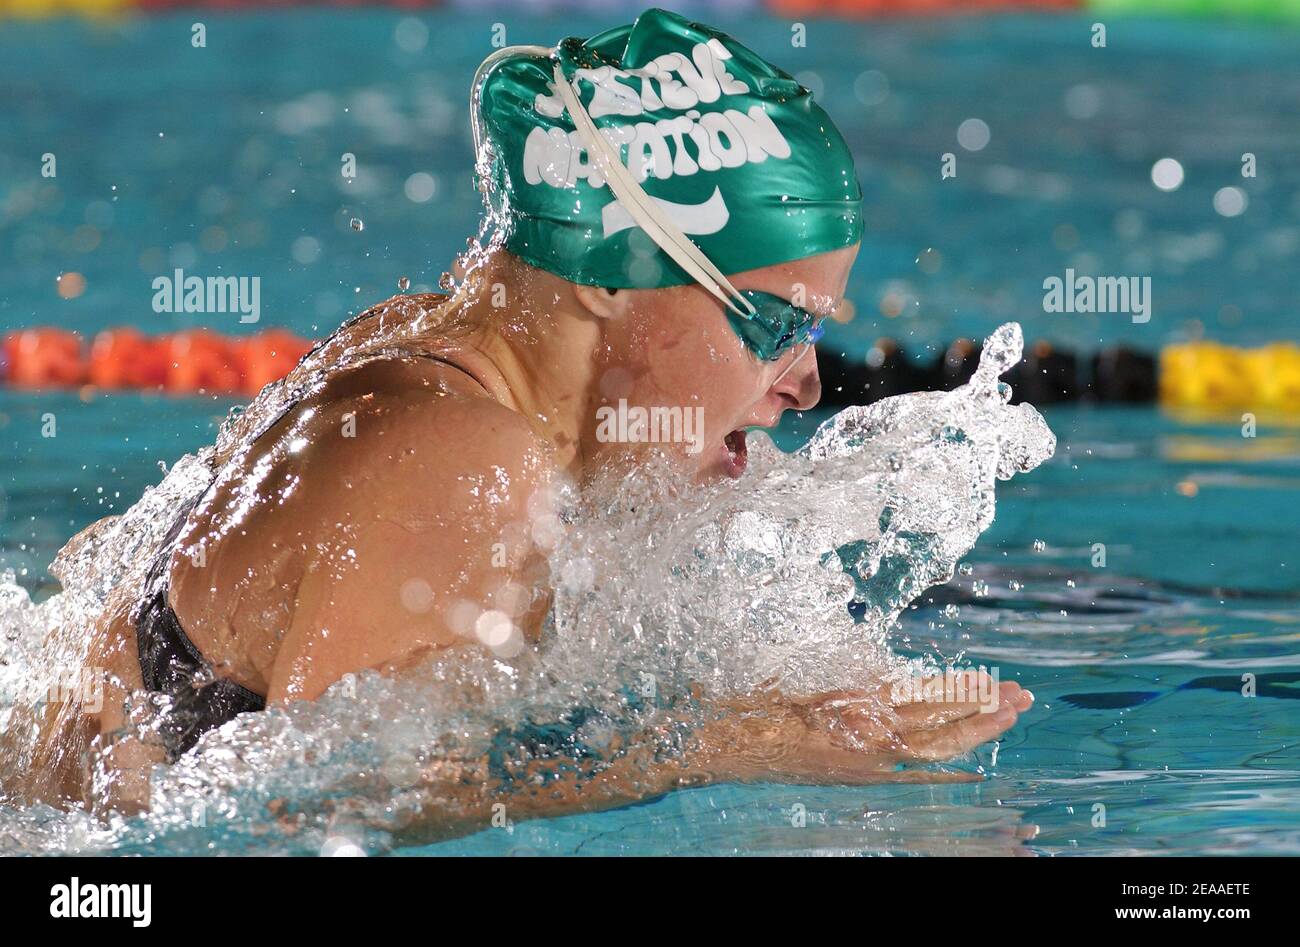 Fanny Babou of France in action on women's 200 meters breackstroke during  the French swimming championships short course, in Chalon-sur-Saone,  France, on December 3, 2005. Photo by Nicolas  Gouhier/CAMELEON/ABACAPRESS.COM Stock Photo -